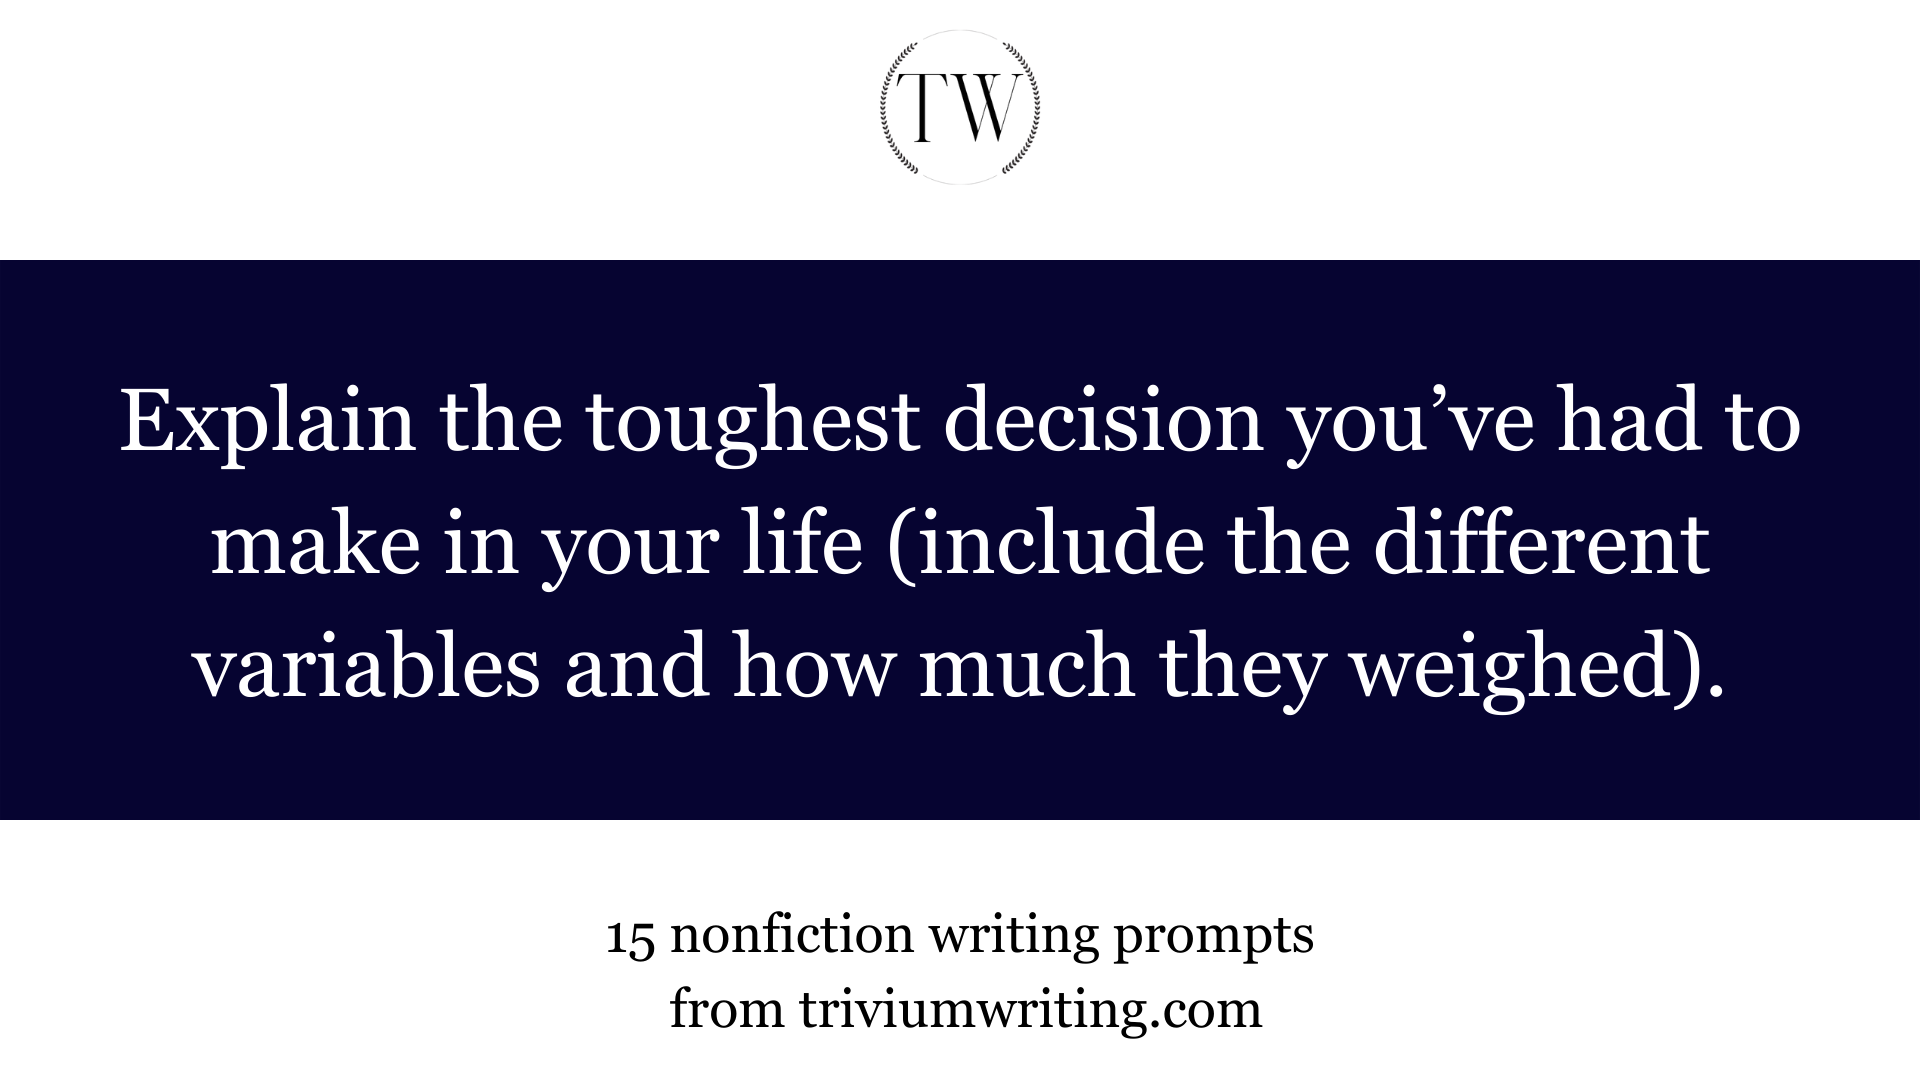 Explain the toughest decision you’ve had to make in your life